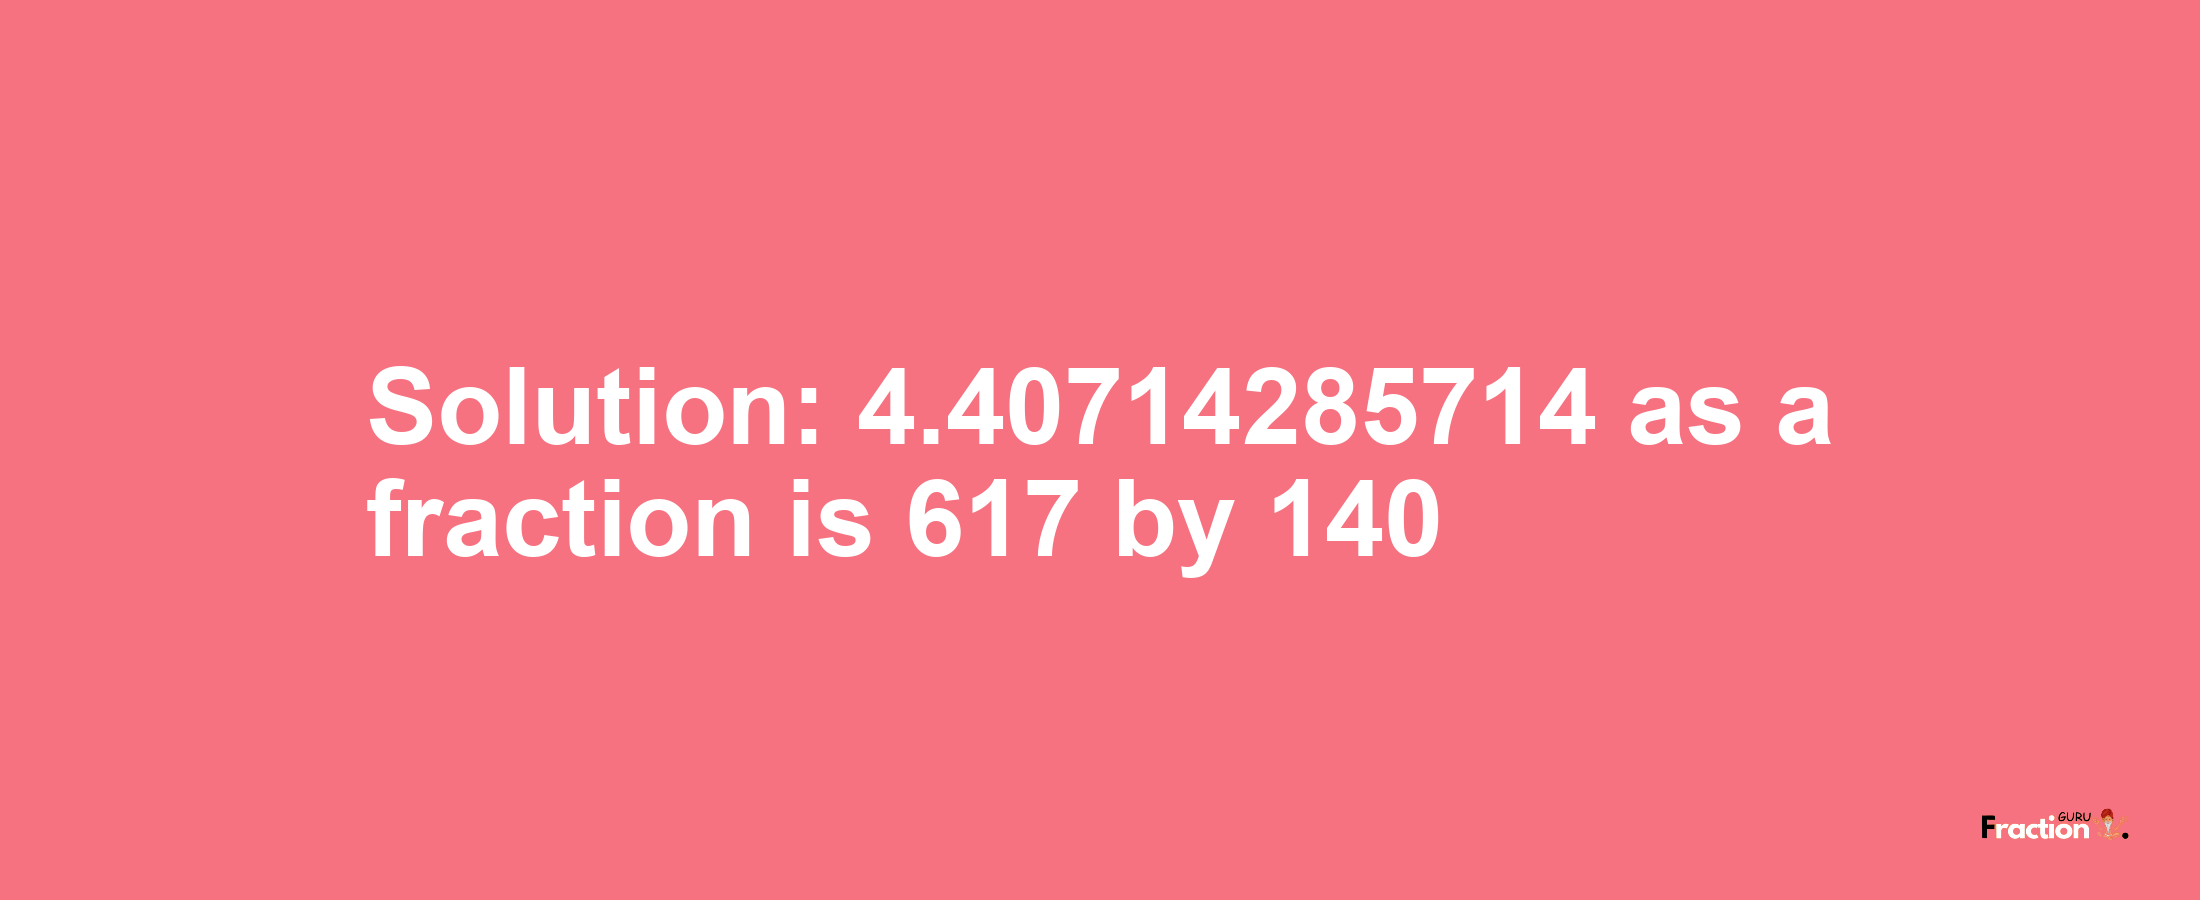 Solution:4.40714285714 as a fraction is 617/140